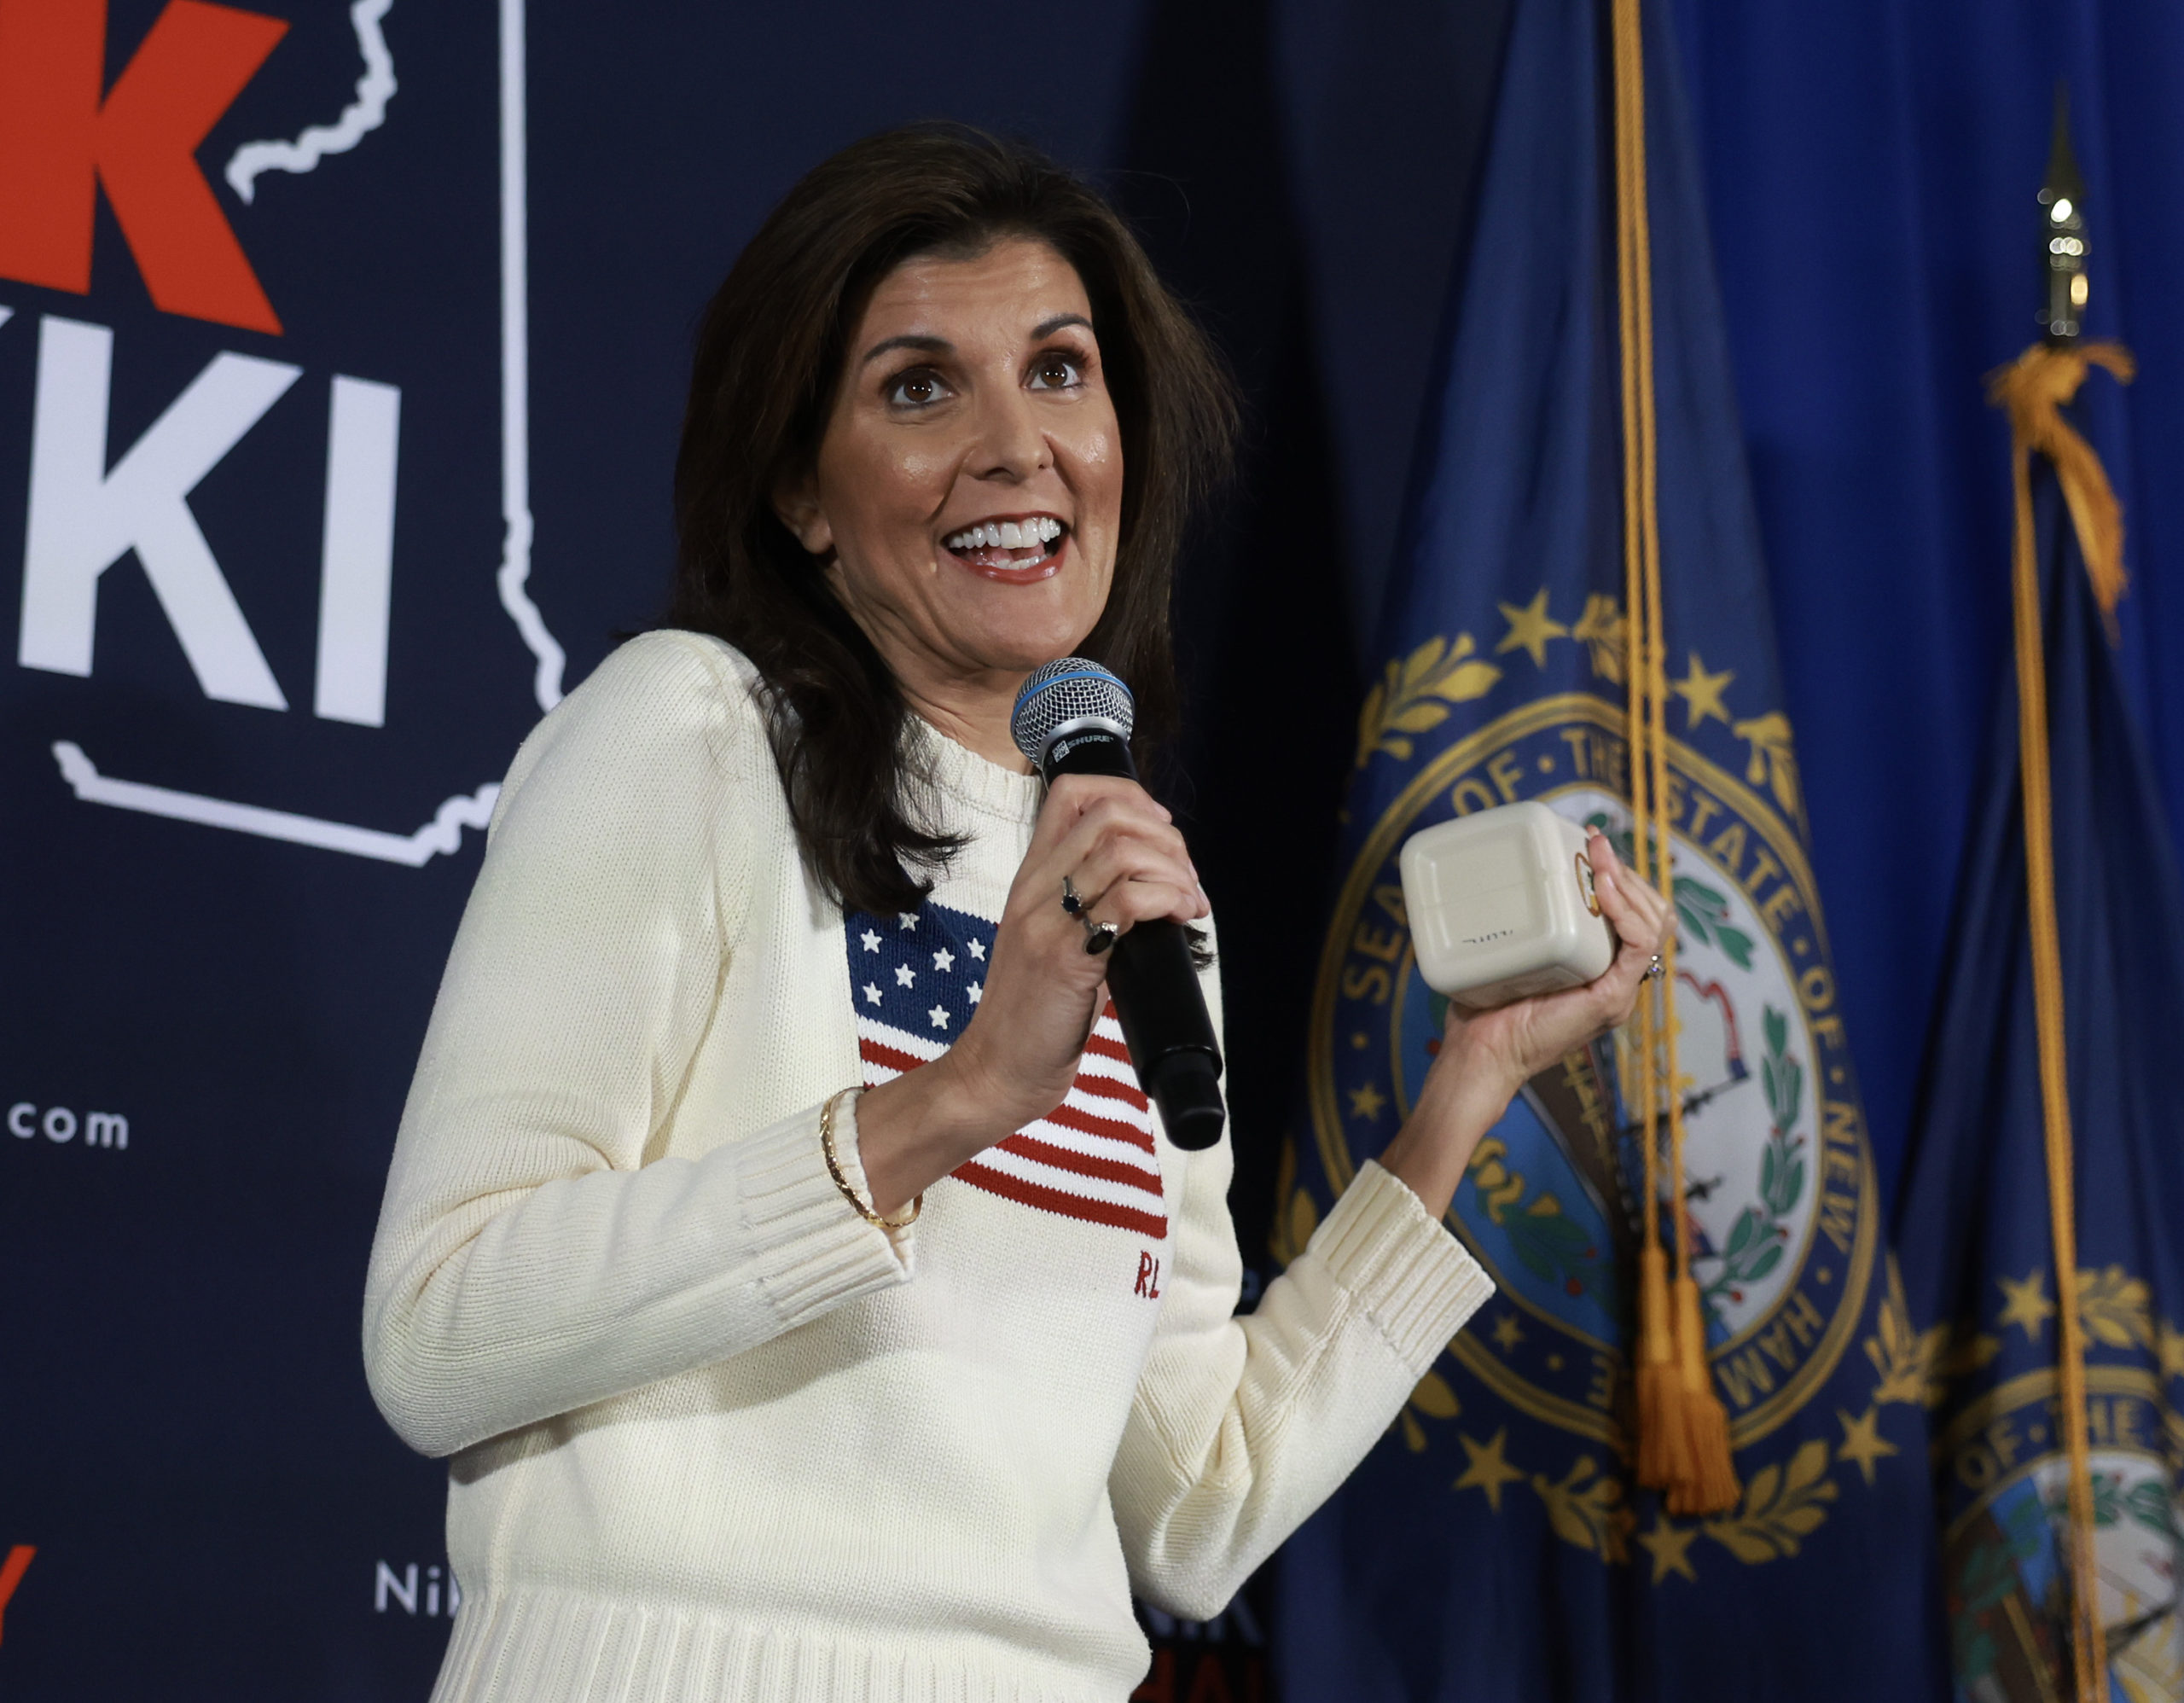 KEENE, NEW HAMPSHIRE - JANUARY 20: Republican presidential candidate, former U.N. Ambassador Nikki Haley, holds a bottle of maple syrup given to her by former Keene Mayor George Hansel at a campaign event held in the Keene Country Club on January 20, 2024 in Keene, New Hampshire. Haley continues to campaign across the state. (Photo by Joe Raedle/Getty Images)